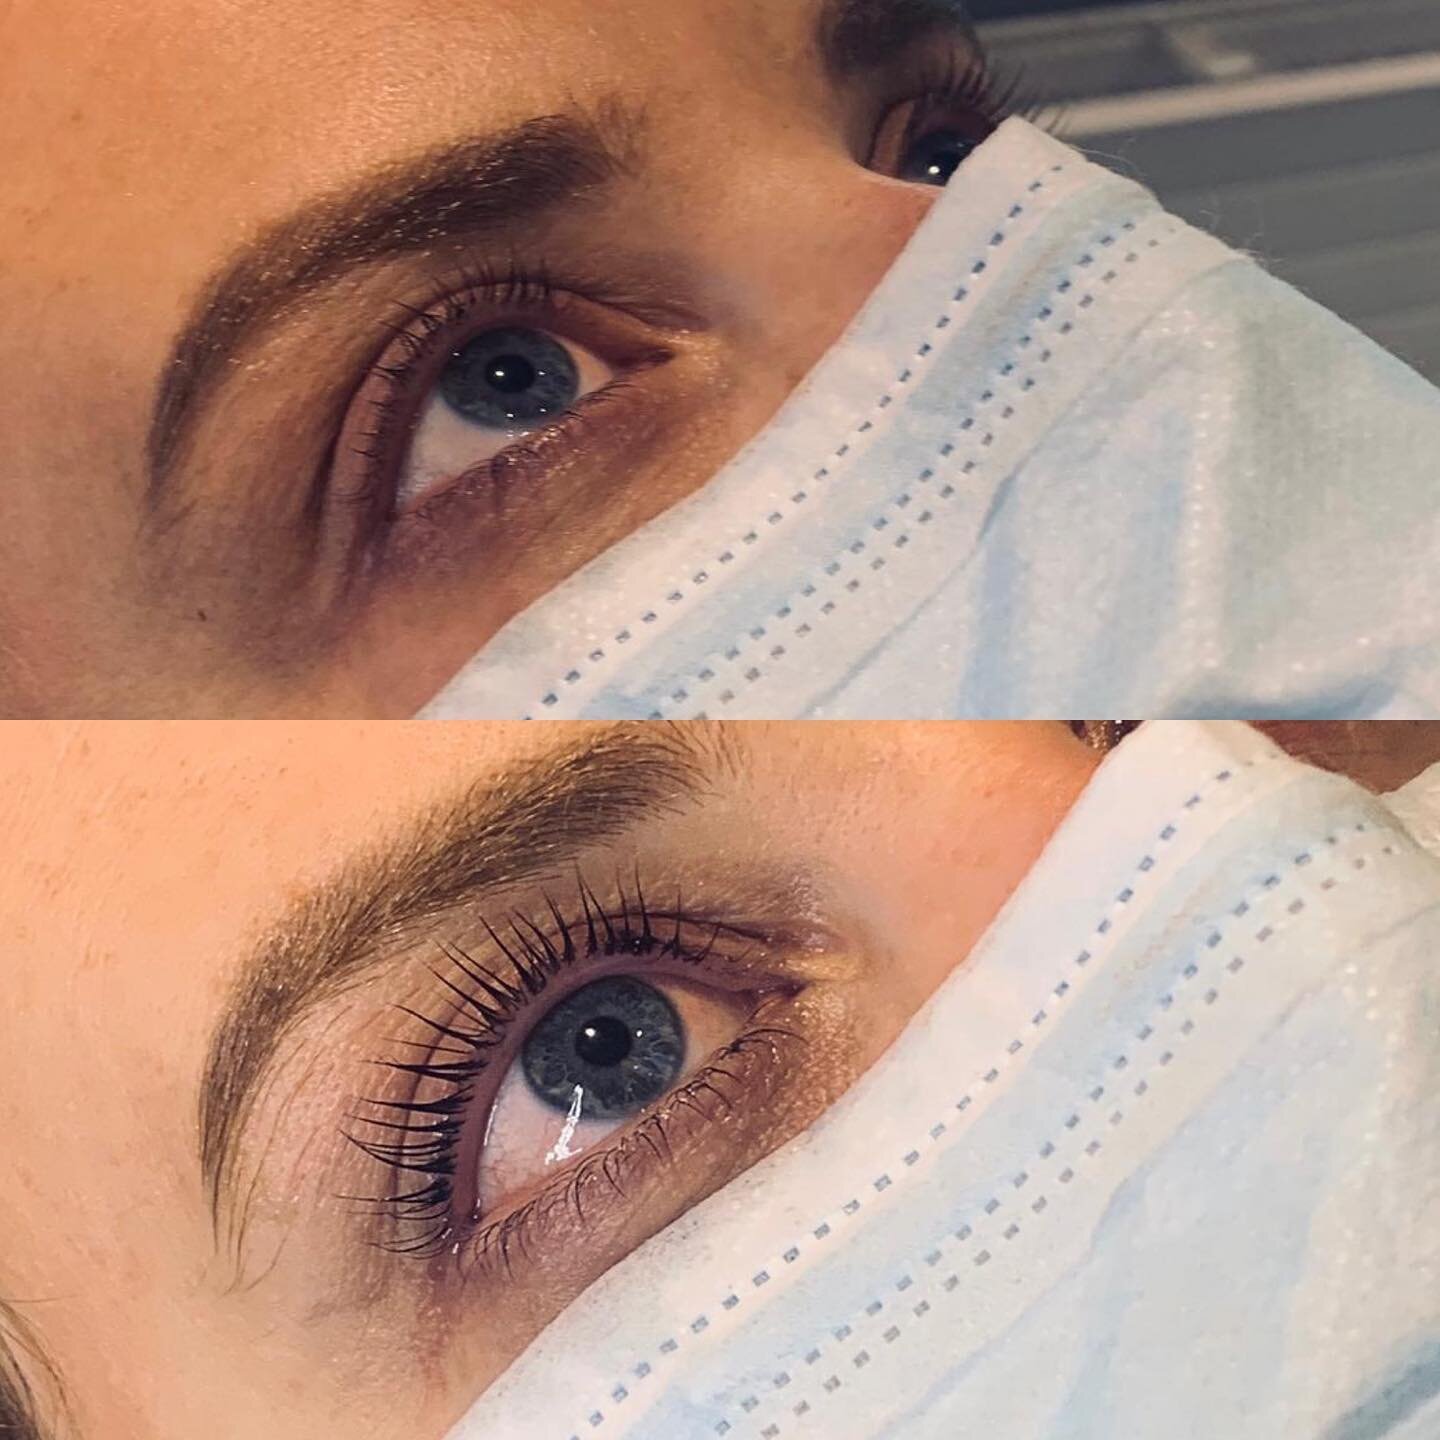 Sophie&rsquo;s back creating fantastic LVL Enhance Lashes on her clients own natural lashes...Lift Volume Length 🤍

Last for 6-8 weeks (with your natural lash cycle) 

&pound;45 with FREE colour refresh after 4 weeks with Sophie! 

#lashlift #lashes